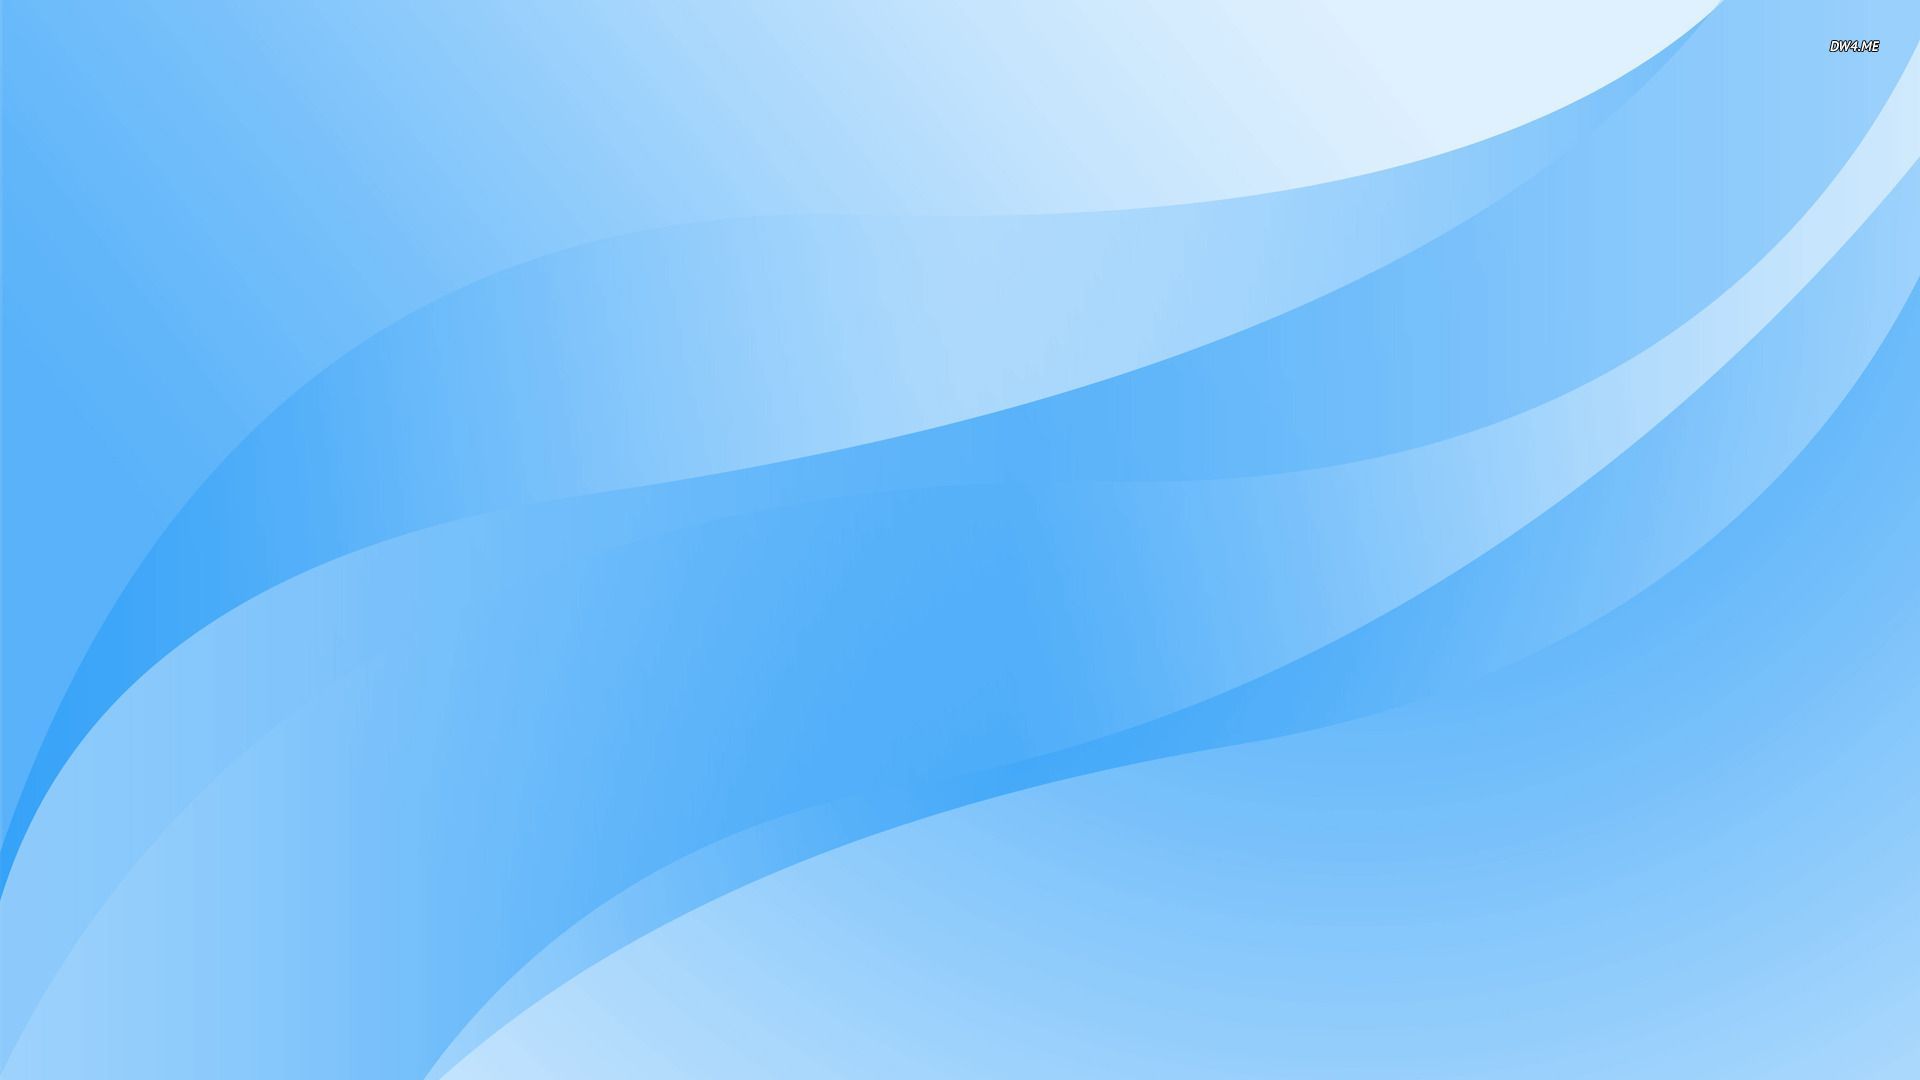 Light blue curves wallpaper - Abstract wallpapers - #2169